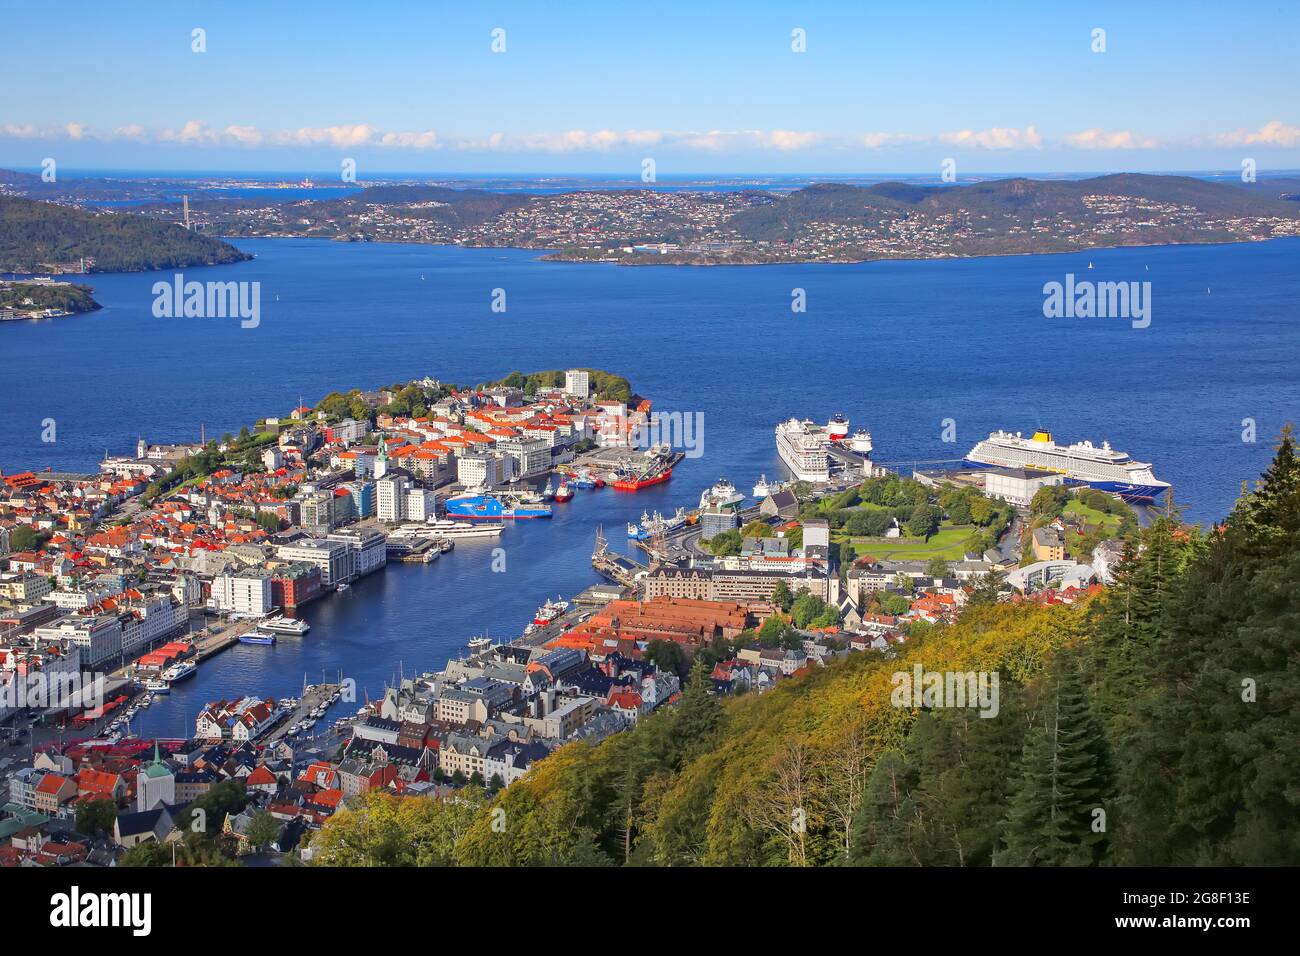 Ariel view of Bergen harbour, with colourful, gabled wooden houses, waterfront restaurants, cruise ships docked & a fish market. Bergen, Norway Stock Photo